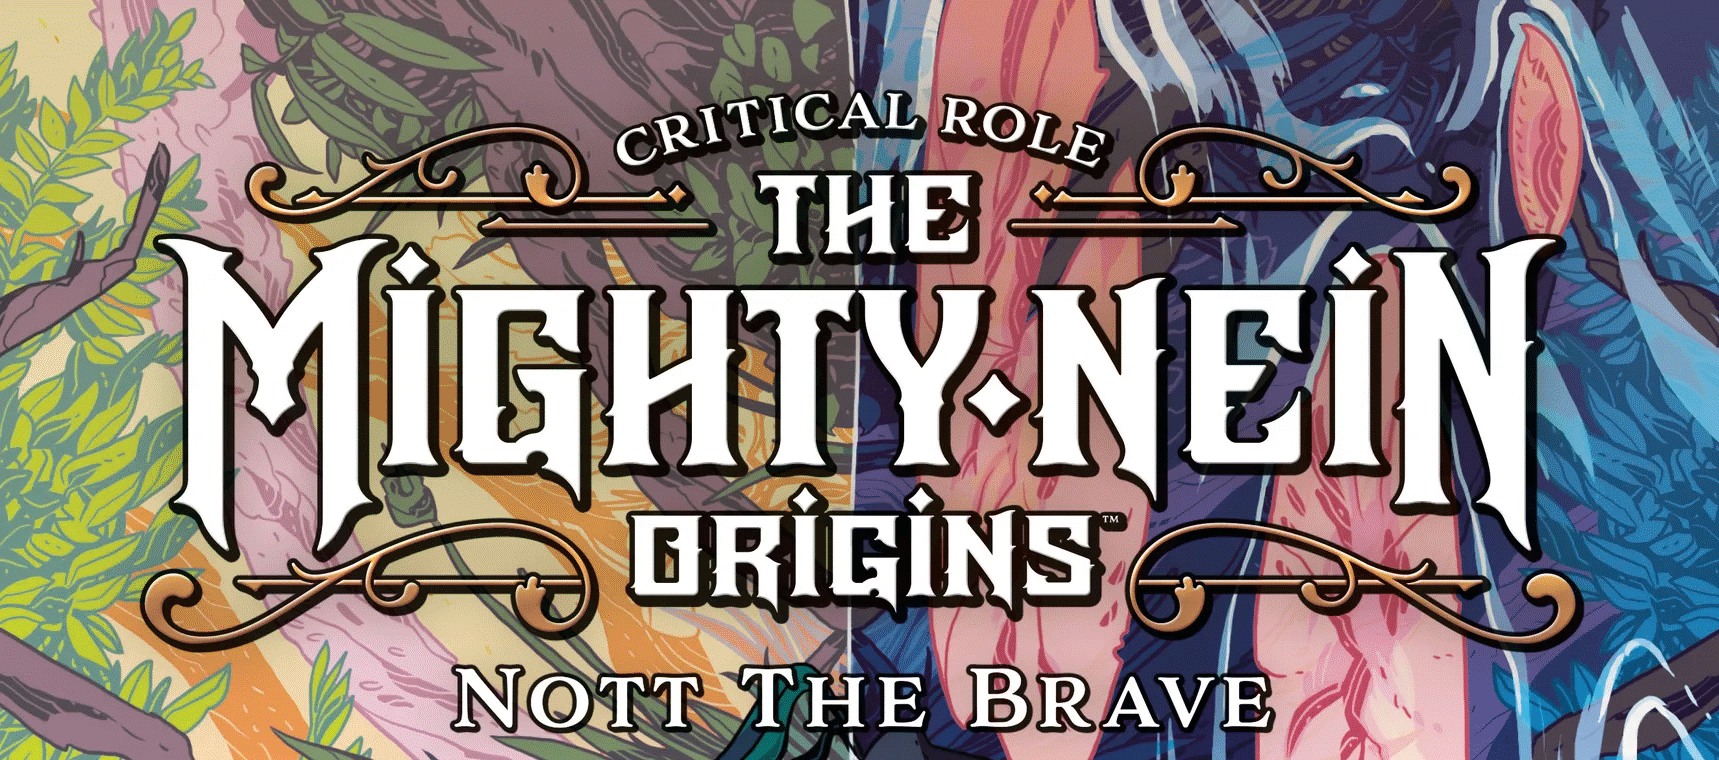 critical-role-the-mighty-nein-origins-nott-the-brave-header